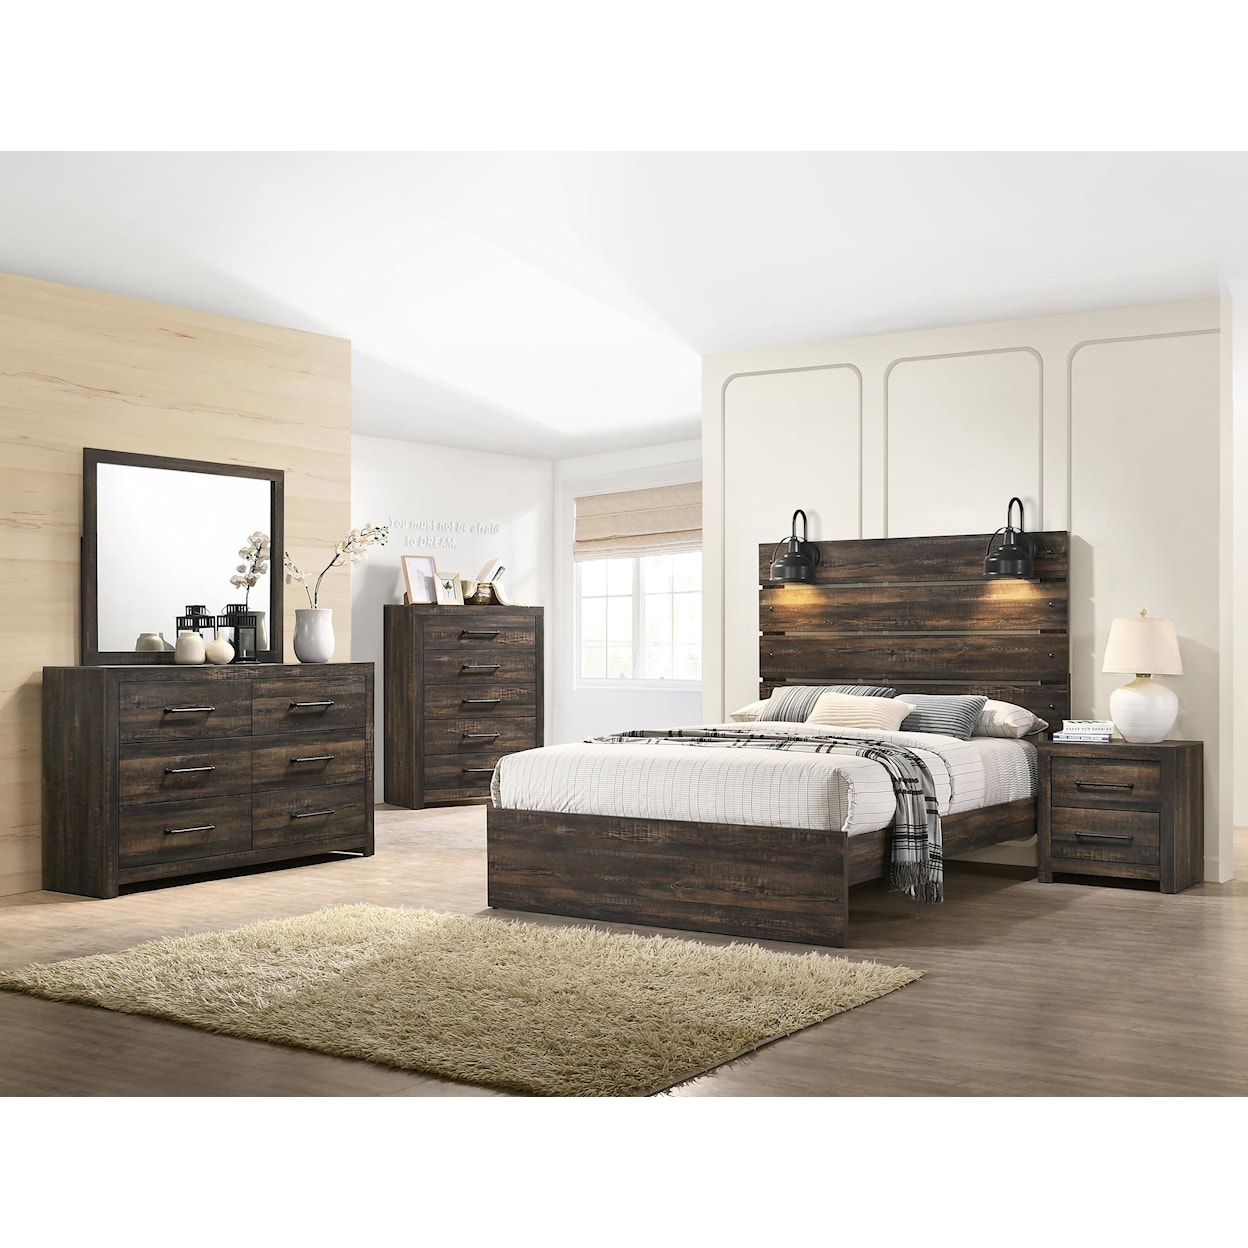 Lifestyle 0399 5 Piece Full Bedroom Set with Chest